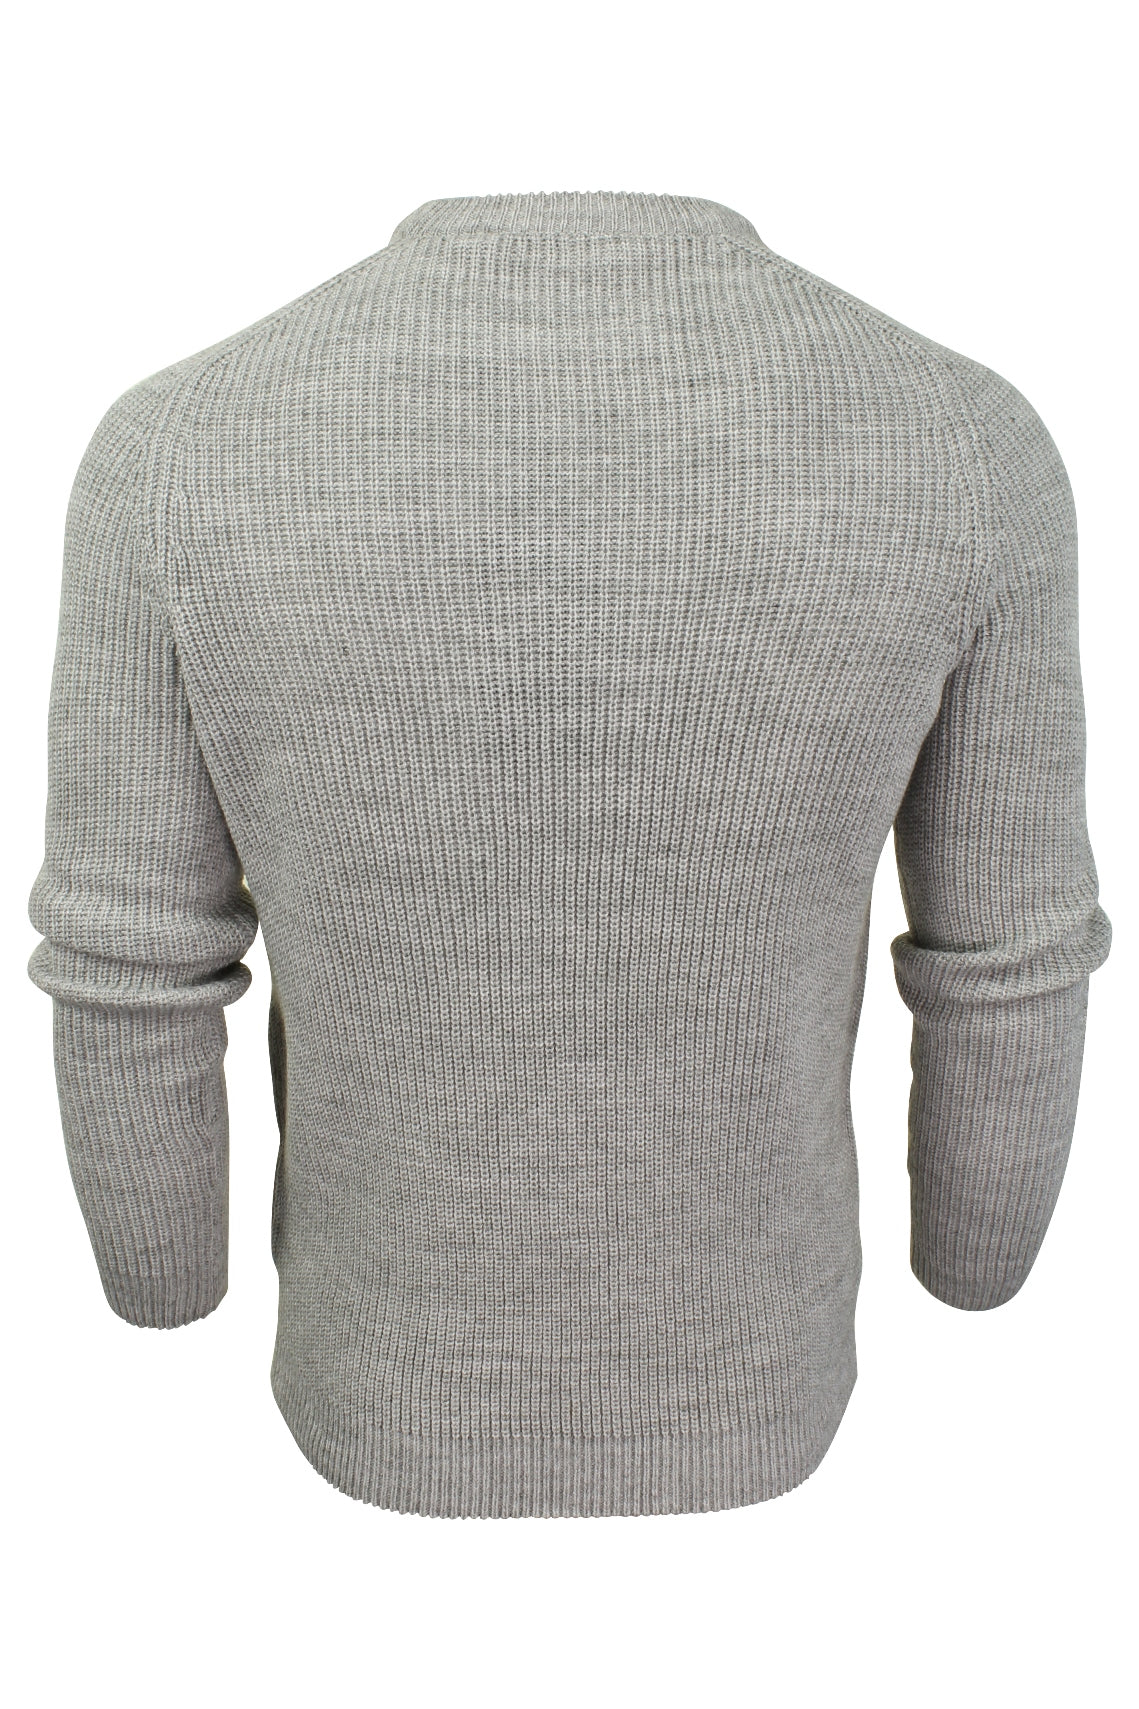 Mens Turtle Neck Knit Jumper by Dissident 'Mino' Wool Mix (Light Silver, S), 03, 1A9713, Light Silver